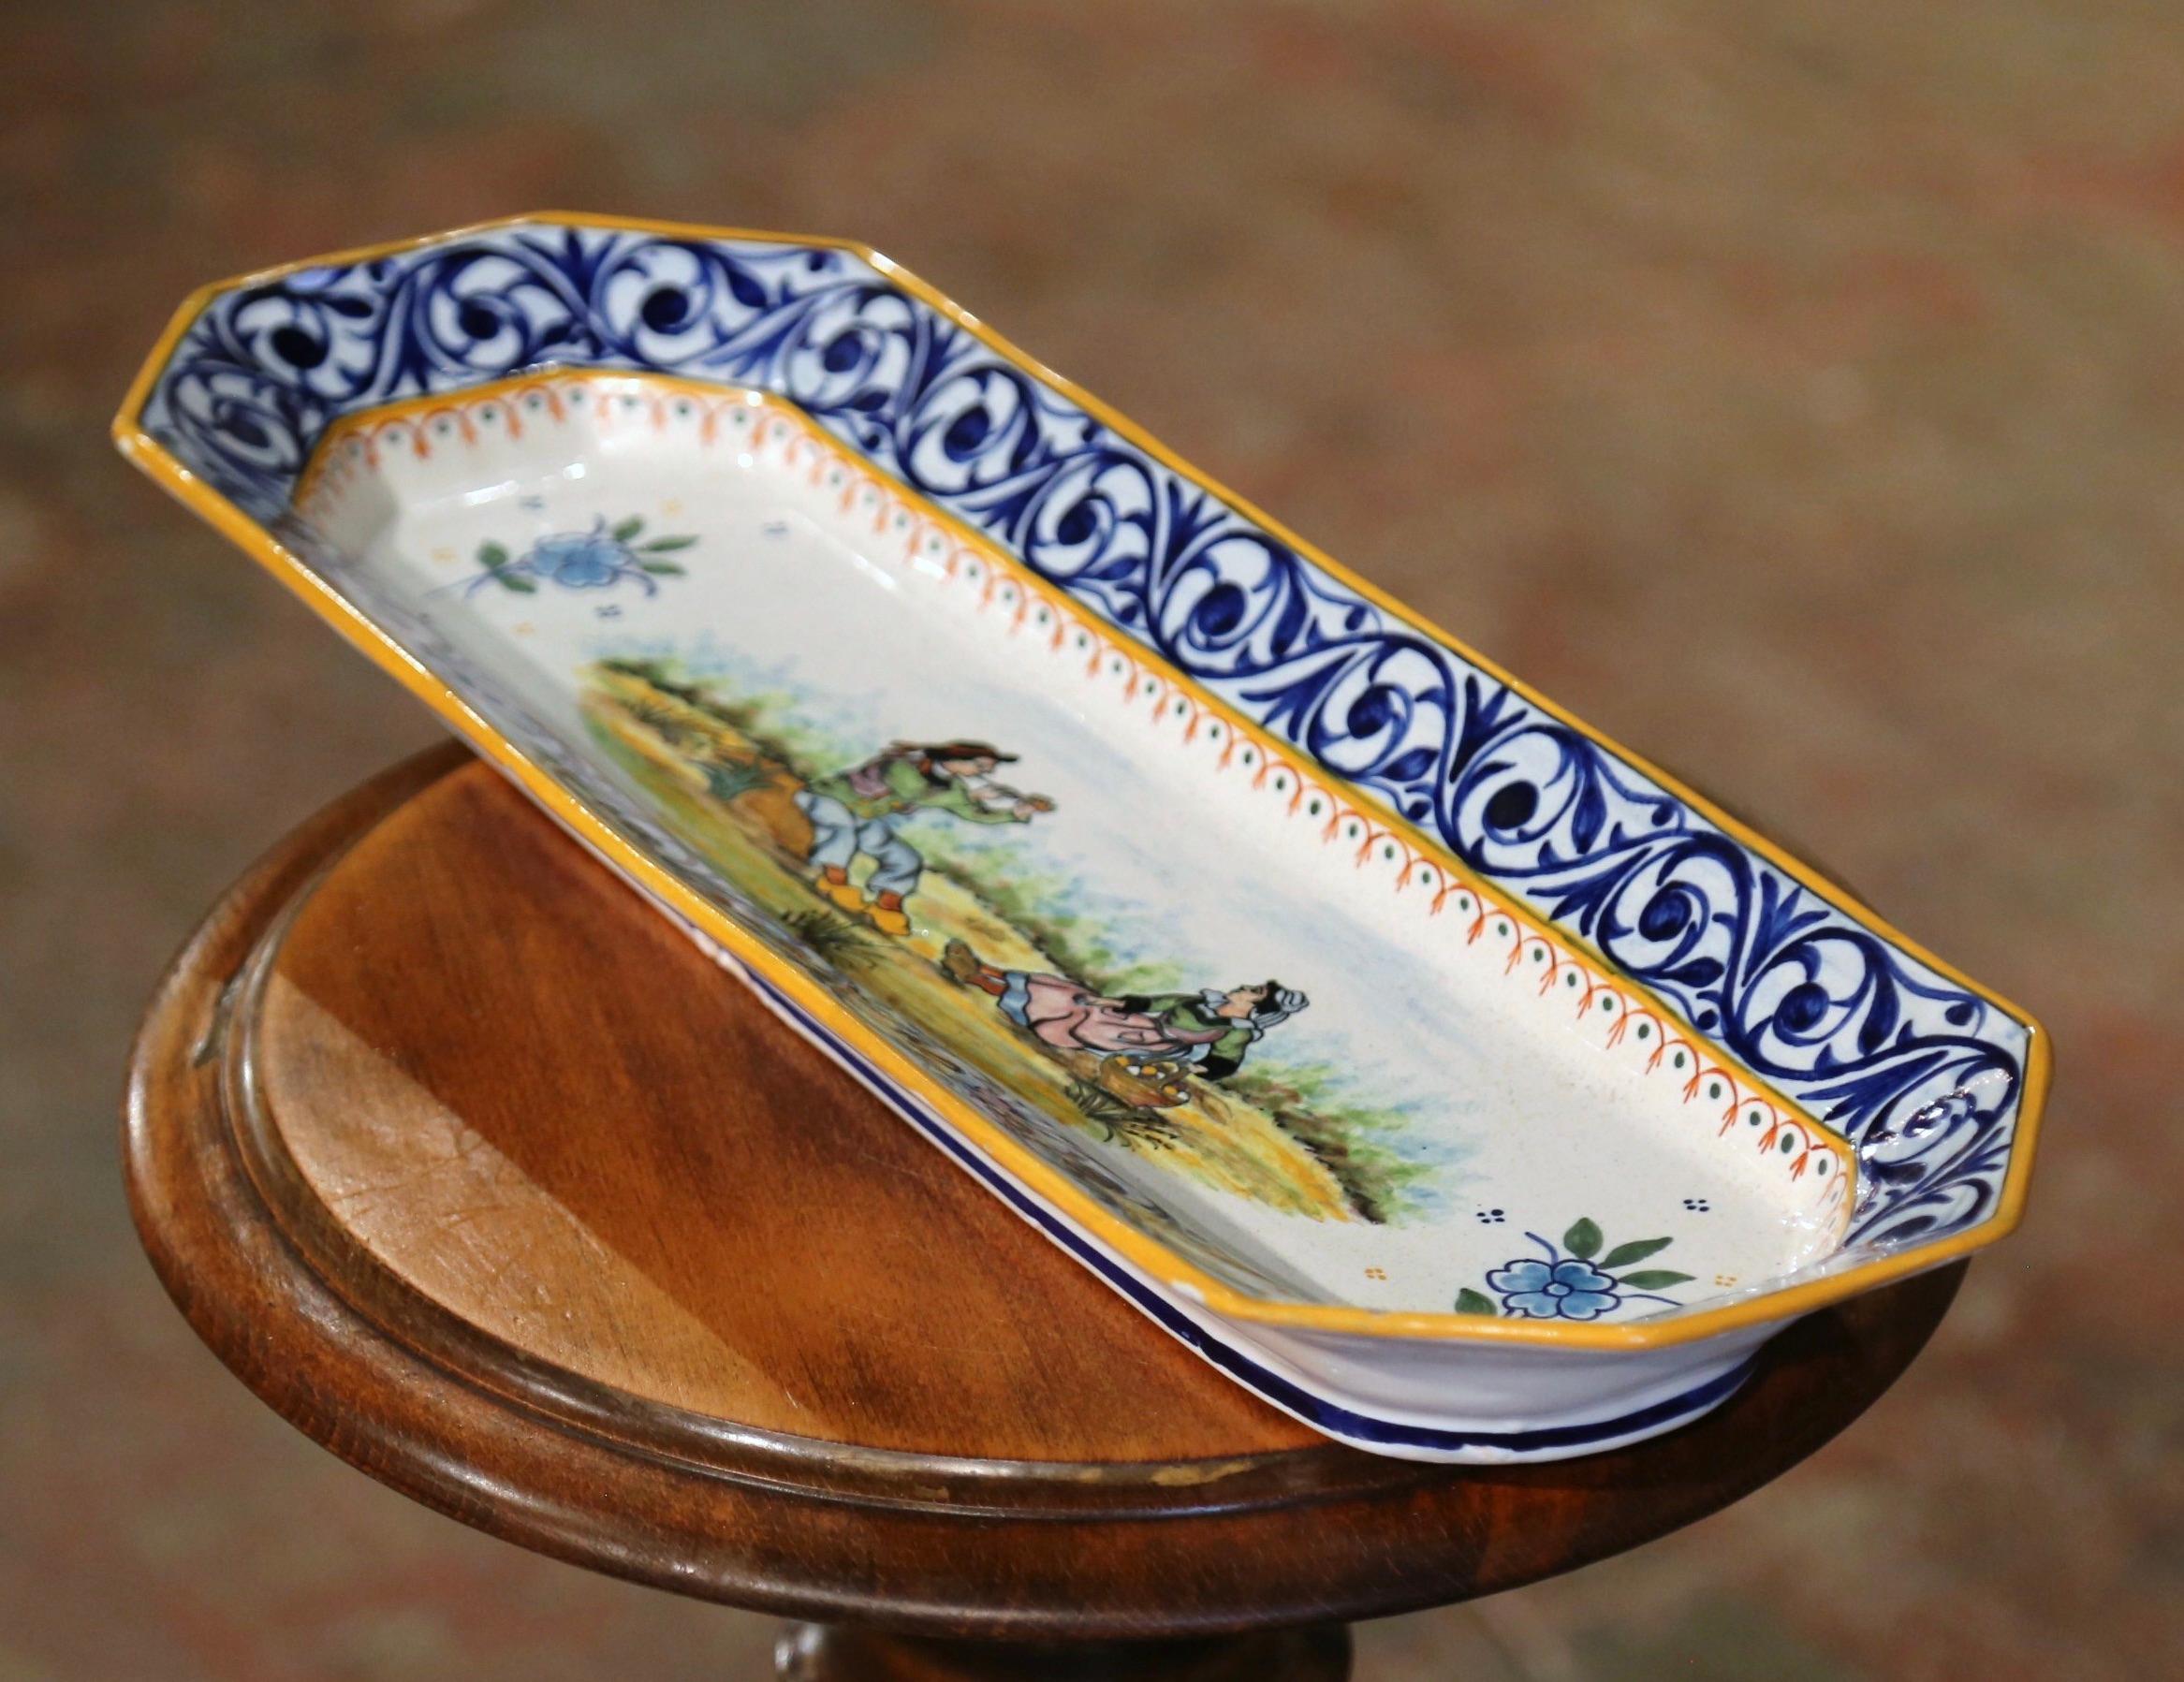 Serve peanuts or chips in this elegant antique dish! Created in Brittany, France circa 1895, the hand painted faience dish is rectangular in shape with cut corners. The serving platter is decorated at the center with a Breton couple in traditional